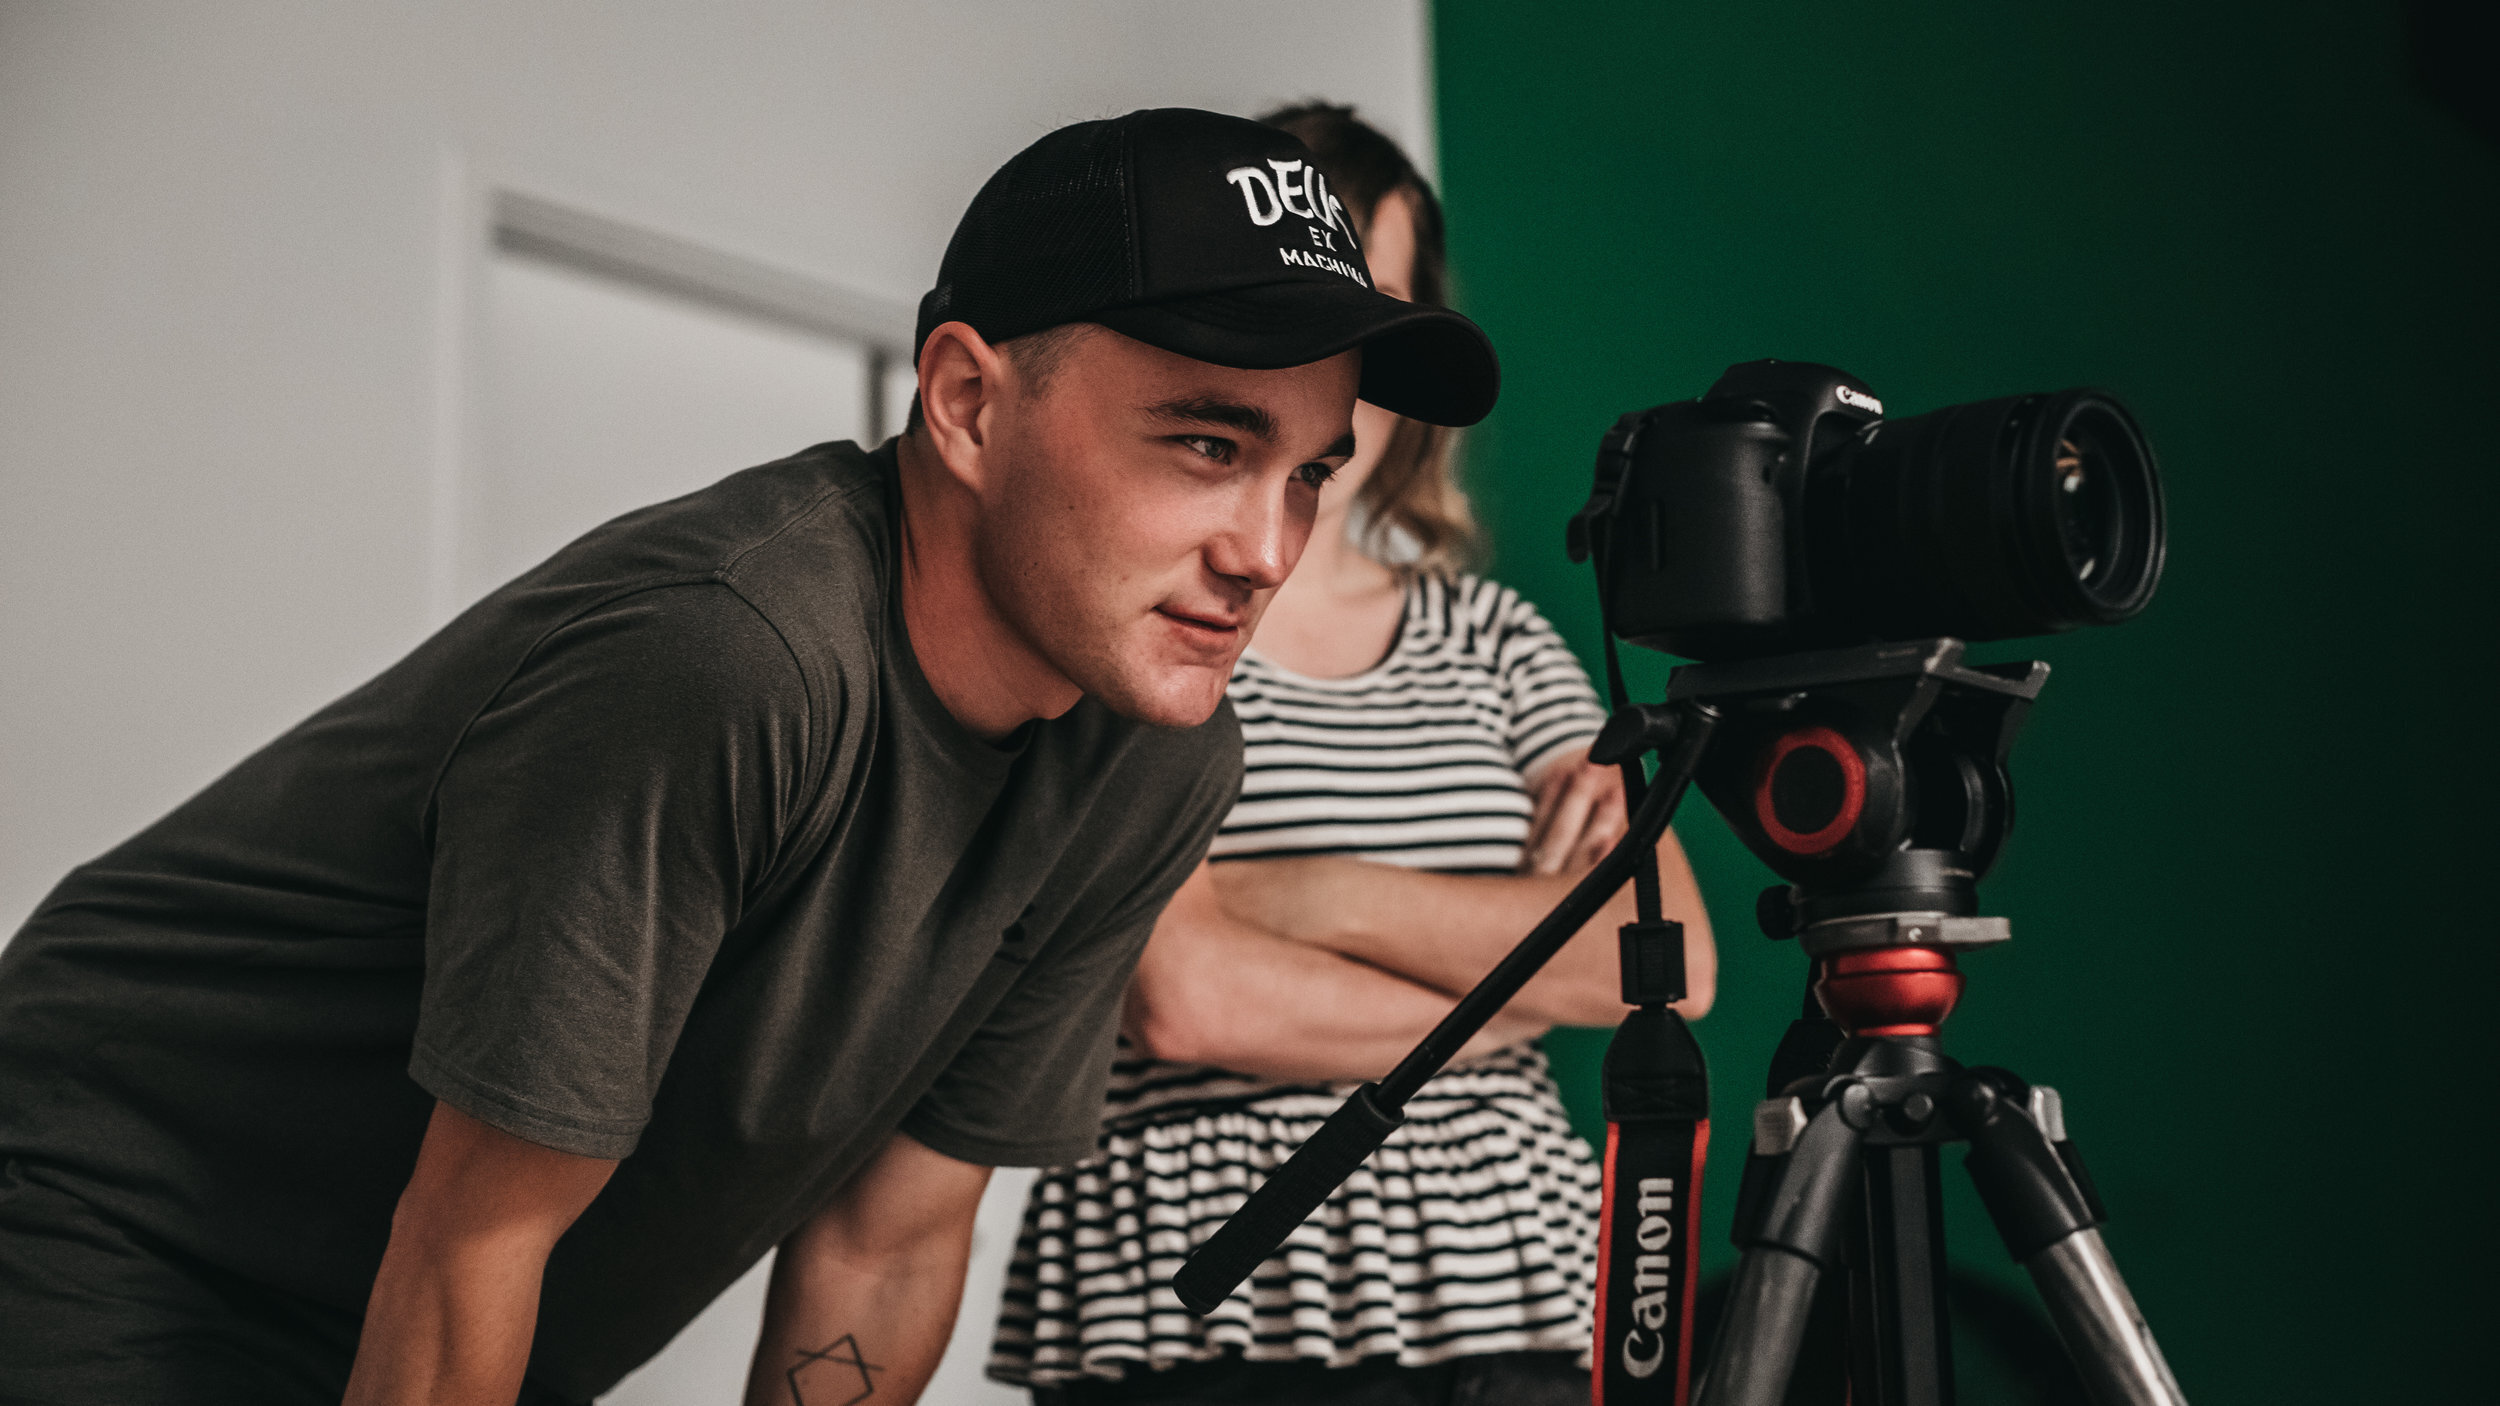 Select behind-the-scenes photos from the second shoot for the Rise Up series